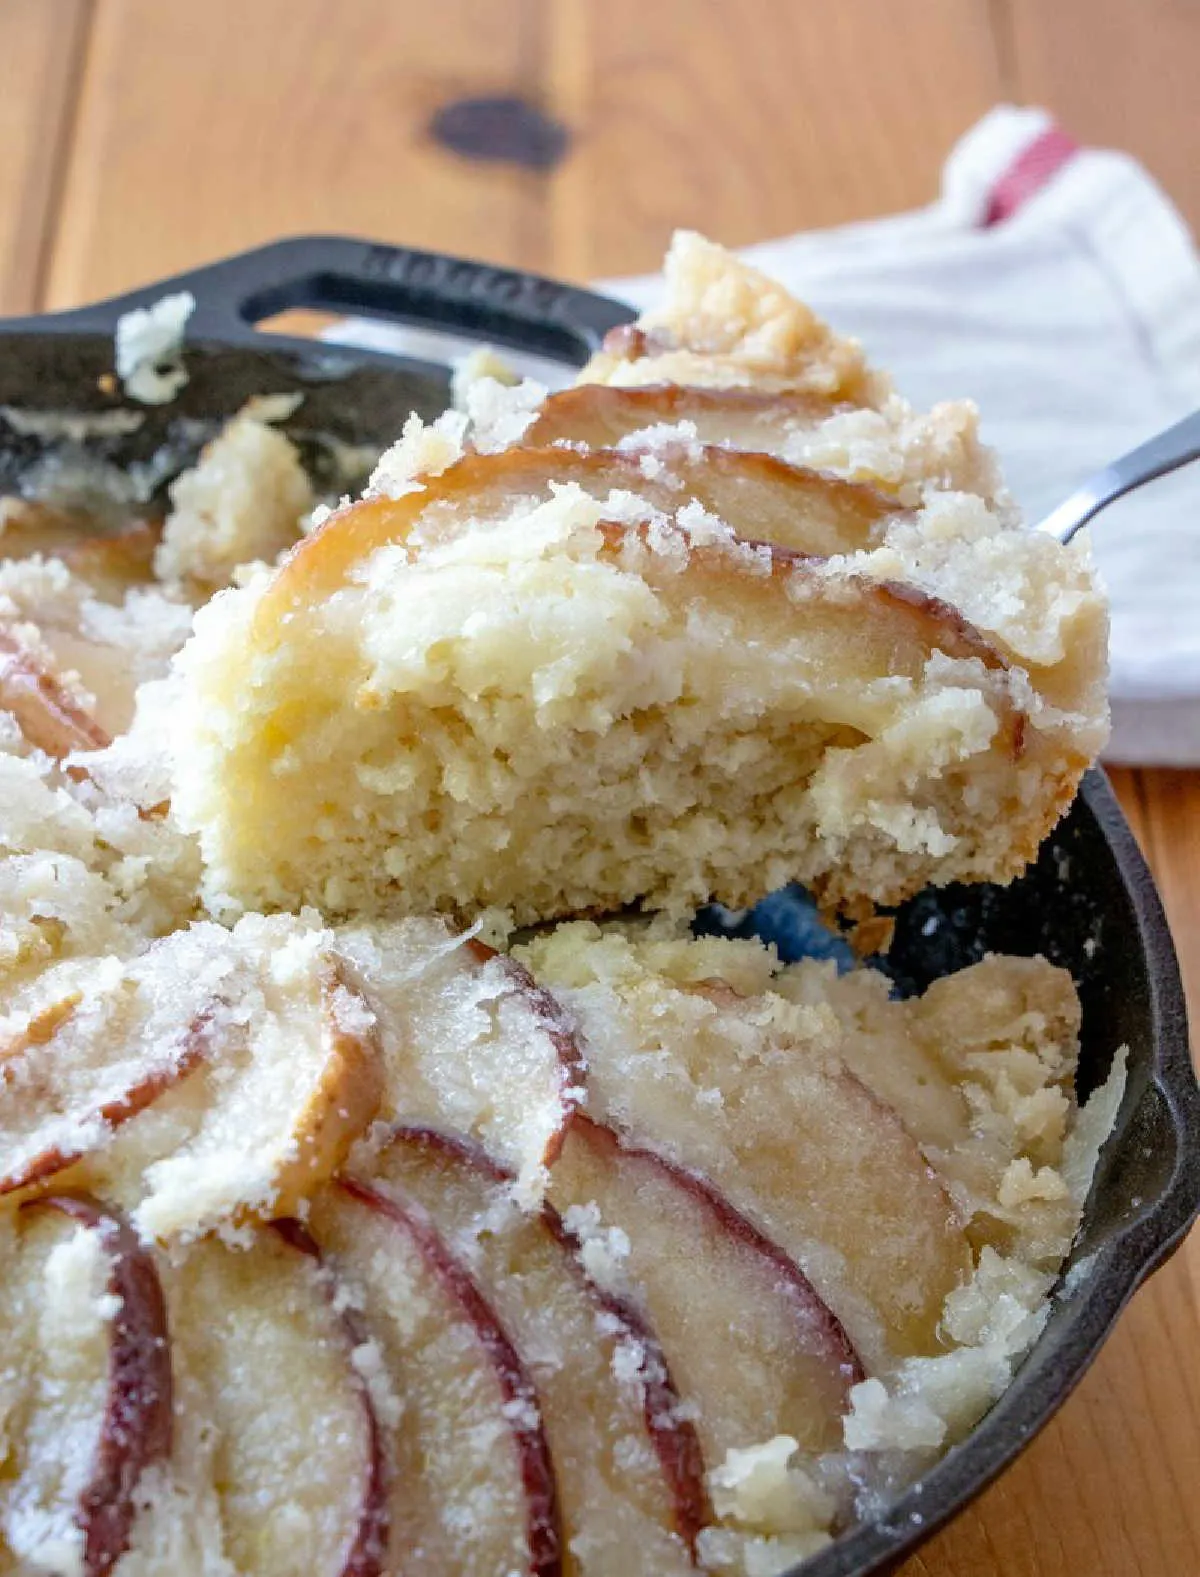 Lifting first slice of dutch apple coffee cake out of pan showing shortbread like texture of cake, fresh apple slices and buttery crumb topping.